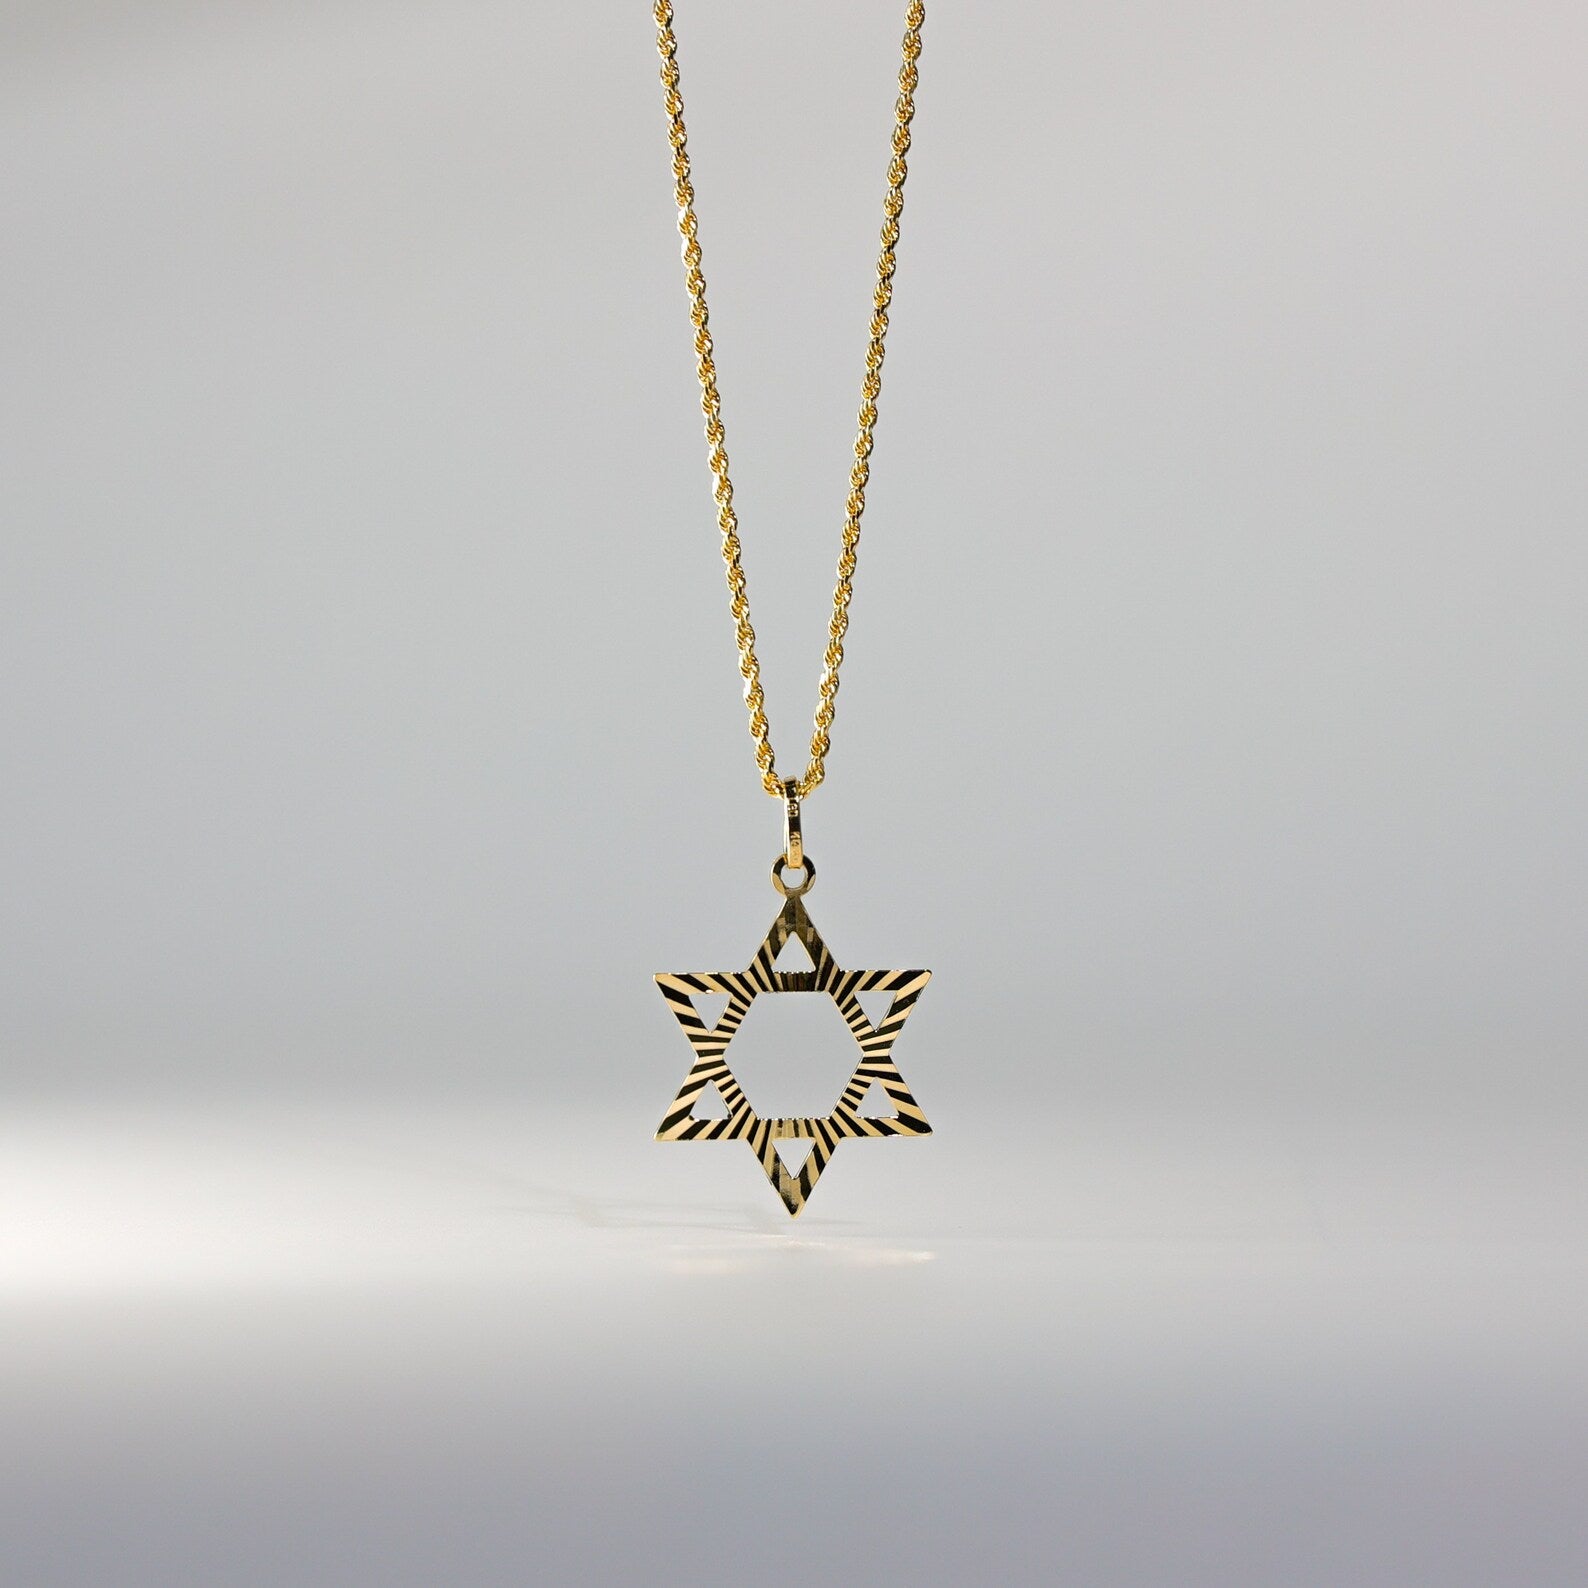 The Star of David Gold Pendant - Charlie & Co. Jewelry